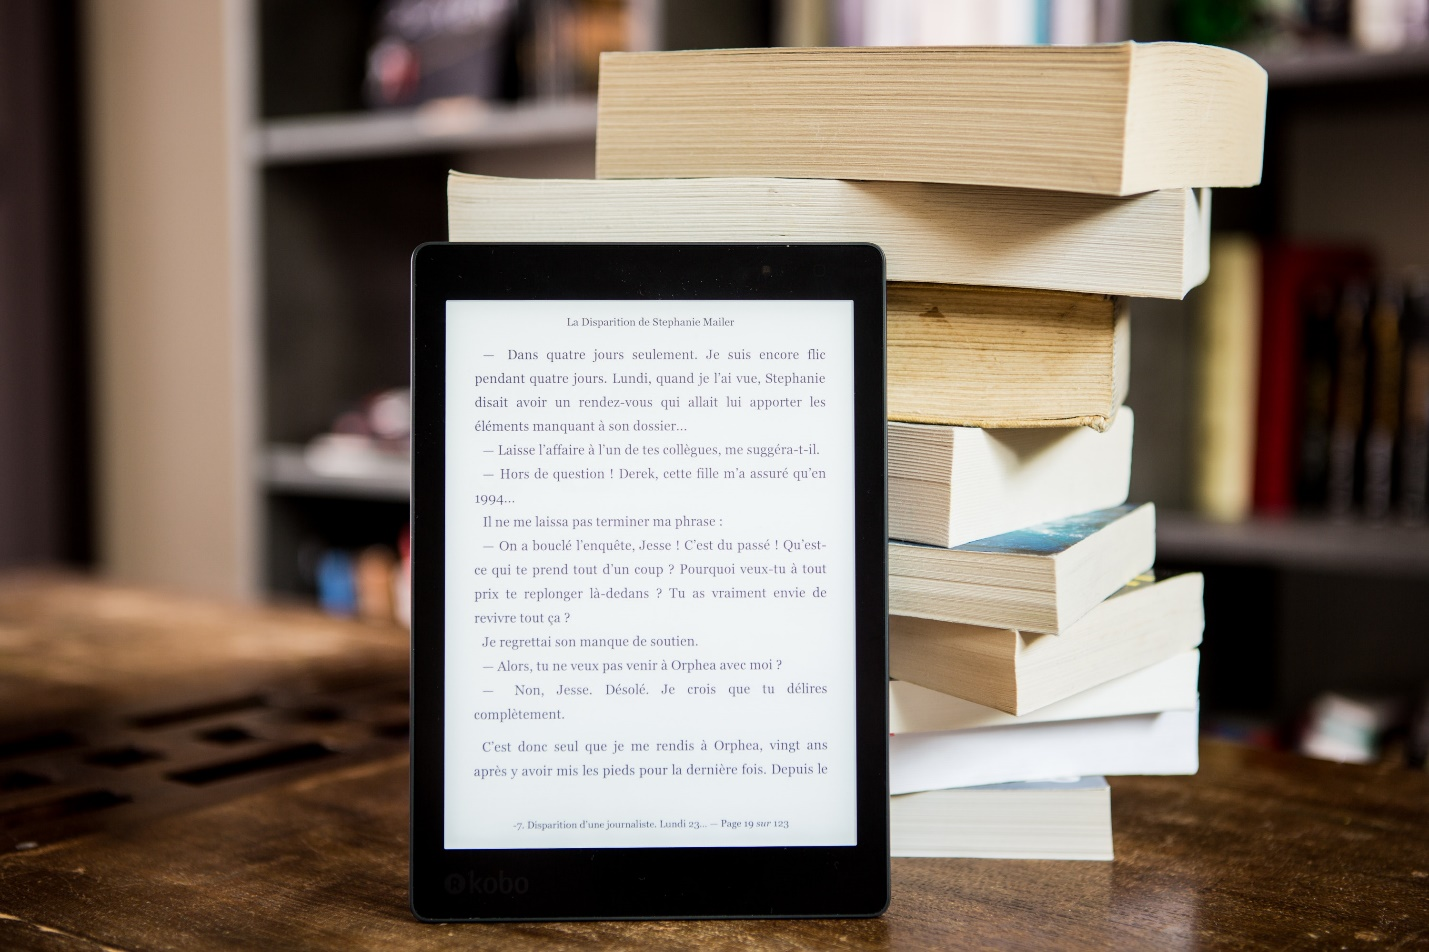 An eBook on a tablet standing against a pile of books.